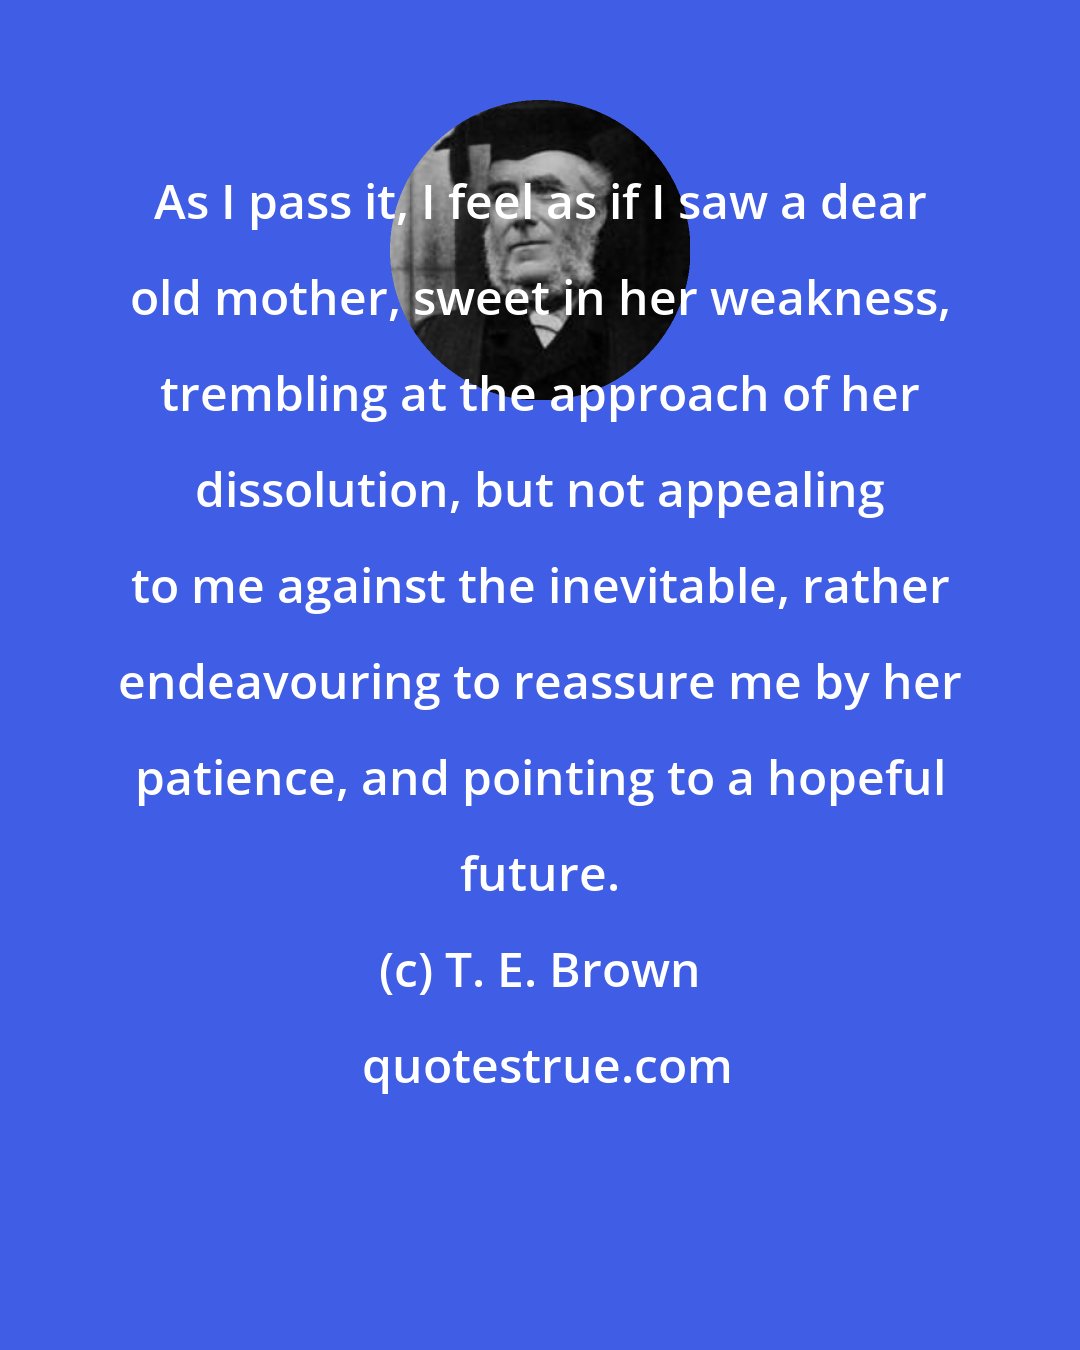 T. E. Brown: As I pass it, I feel as if I saw a dear old mother, sweet in her weakness, trembling at the approach of her dissolution, but not appealing to me against the inevitable, rather endeavouring to reassure me by her patience, and pointing to a hopeful future.